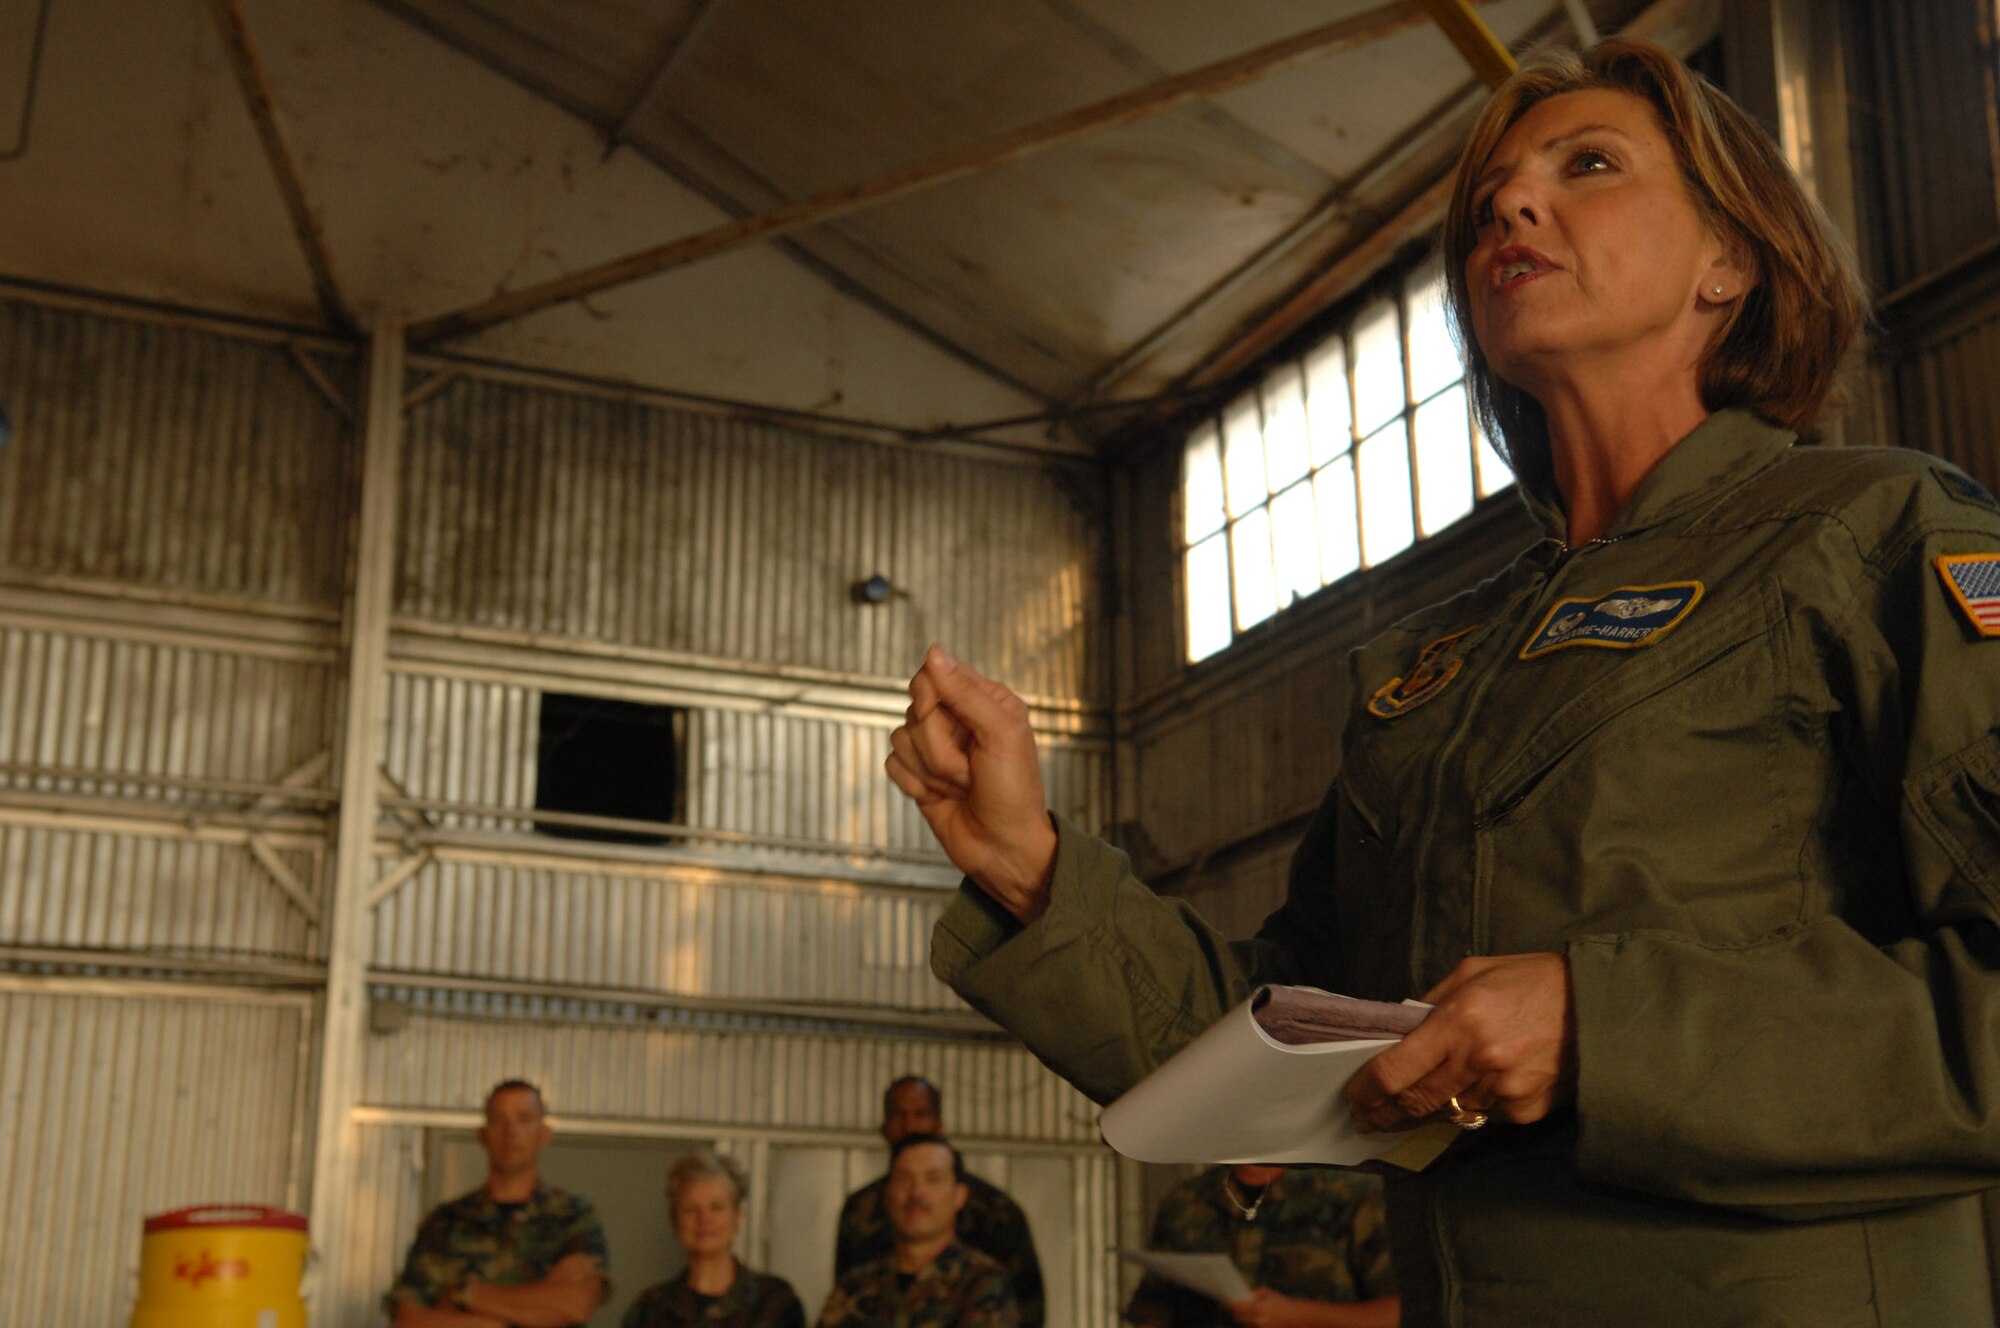 U.S. Air Force Colonel Janet Moore-Harbert, 706th Provisional Wing Commander, Fort Gordon Army Base, GA, briefs hundreds of medical personnel regarding their upcoming training in Hangar 1 at Augusta Regional Airport during Golden Medic 2007. Golden Medic is a yearly medical exercise sponsored by the U.S. Army designed to provide a realistic training experience to participating combat support and service support units, while enhancing the overall training and readiness of Army and Air Force medical units. (U.S. Air Force photo by Senior Airman Erica J.Knight)(RELEASED)